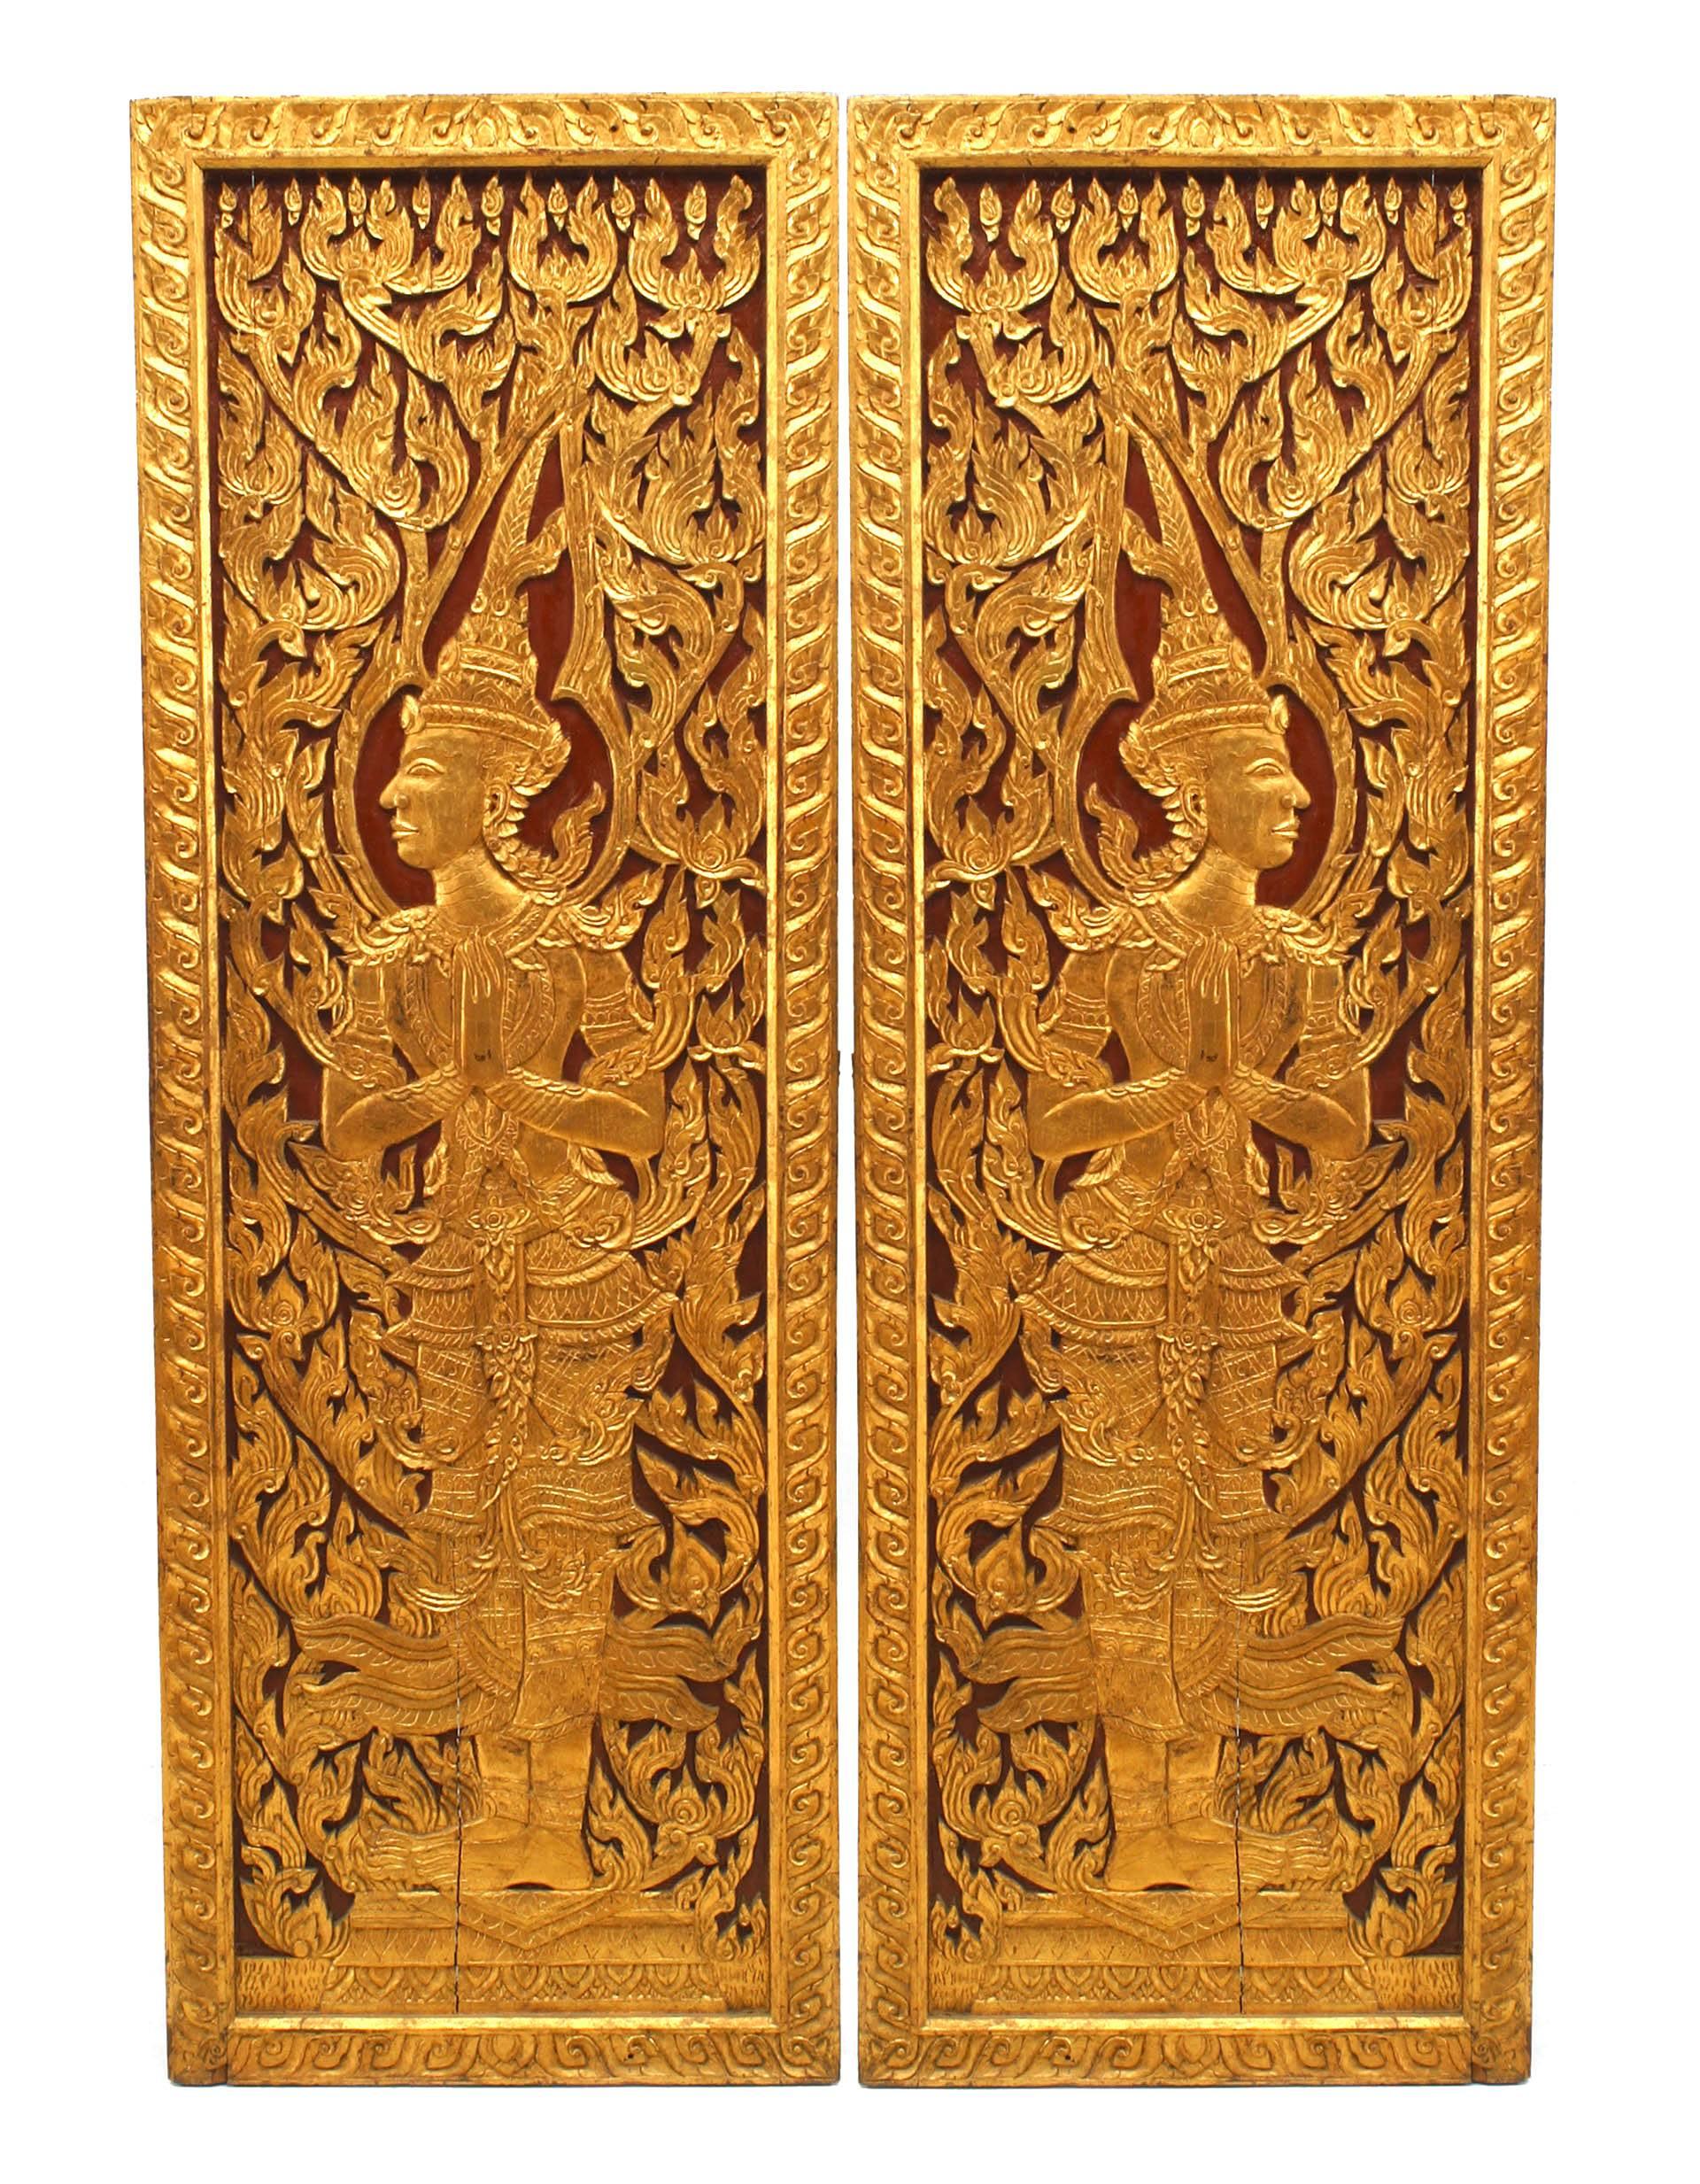 2 PairS of Asian Thai style (19/20th Century) red and gold painted and carved door panels with dancing figures (PRICED PER Pair).
